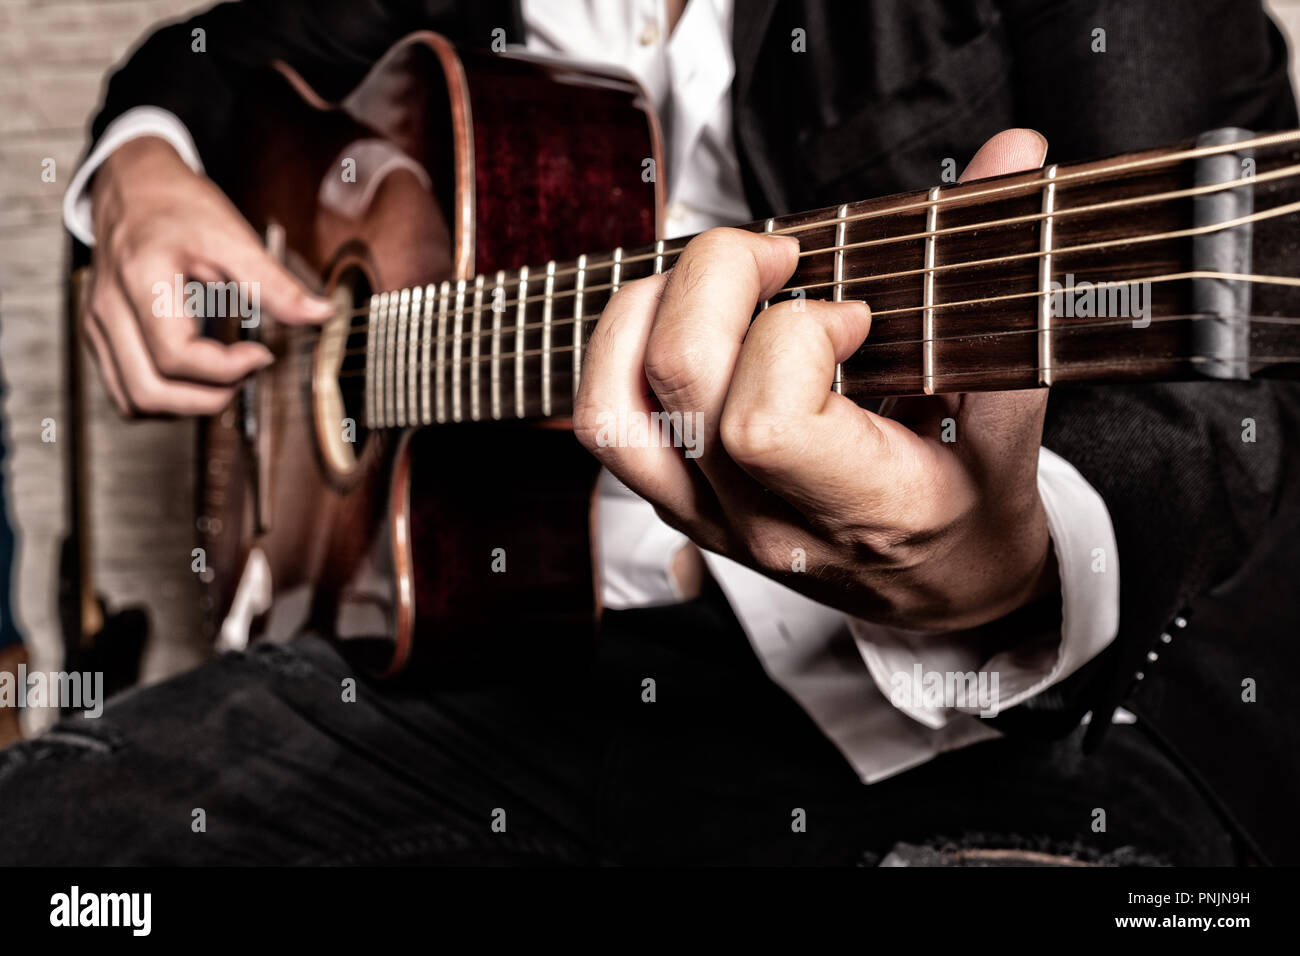 hands of musician playing the guitar Stock Photo